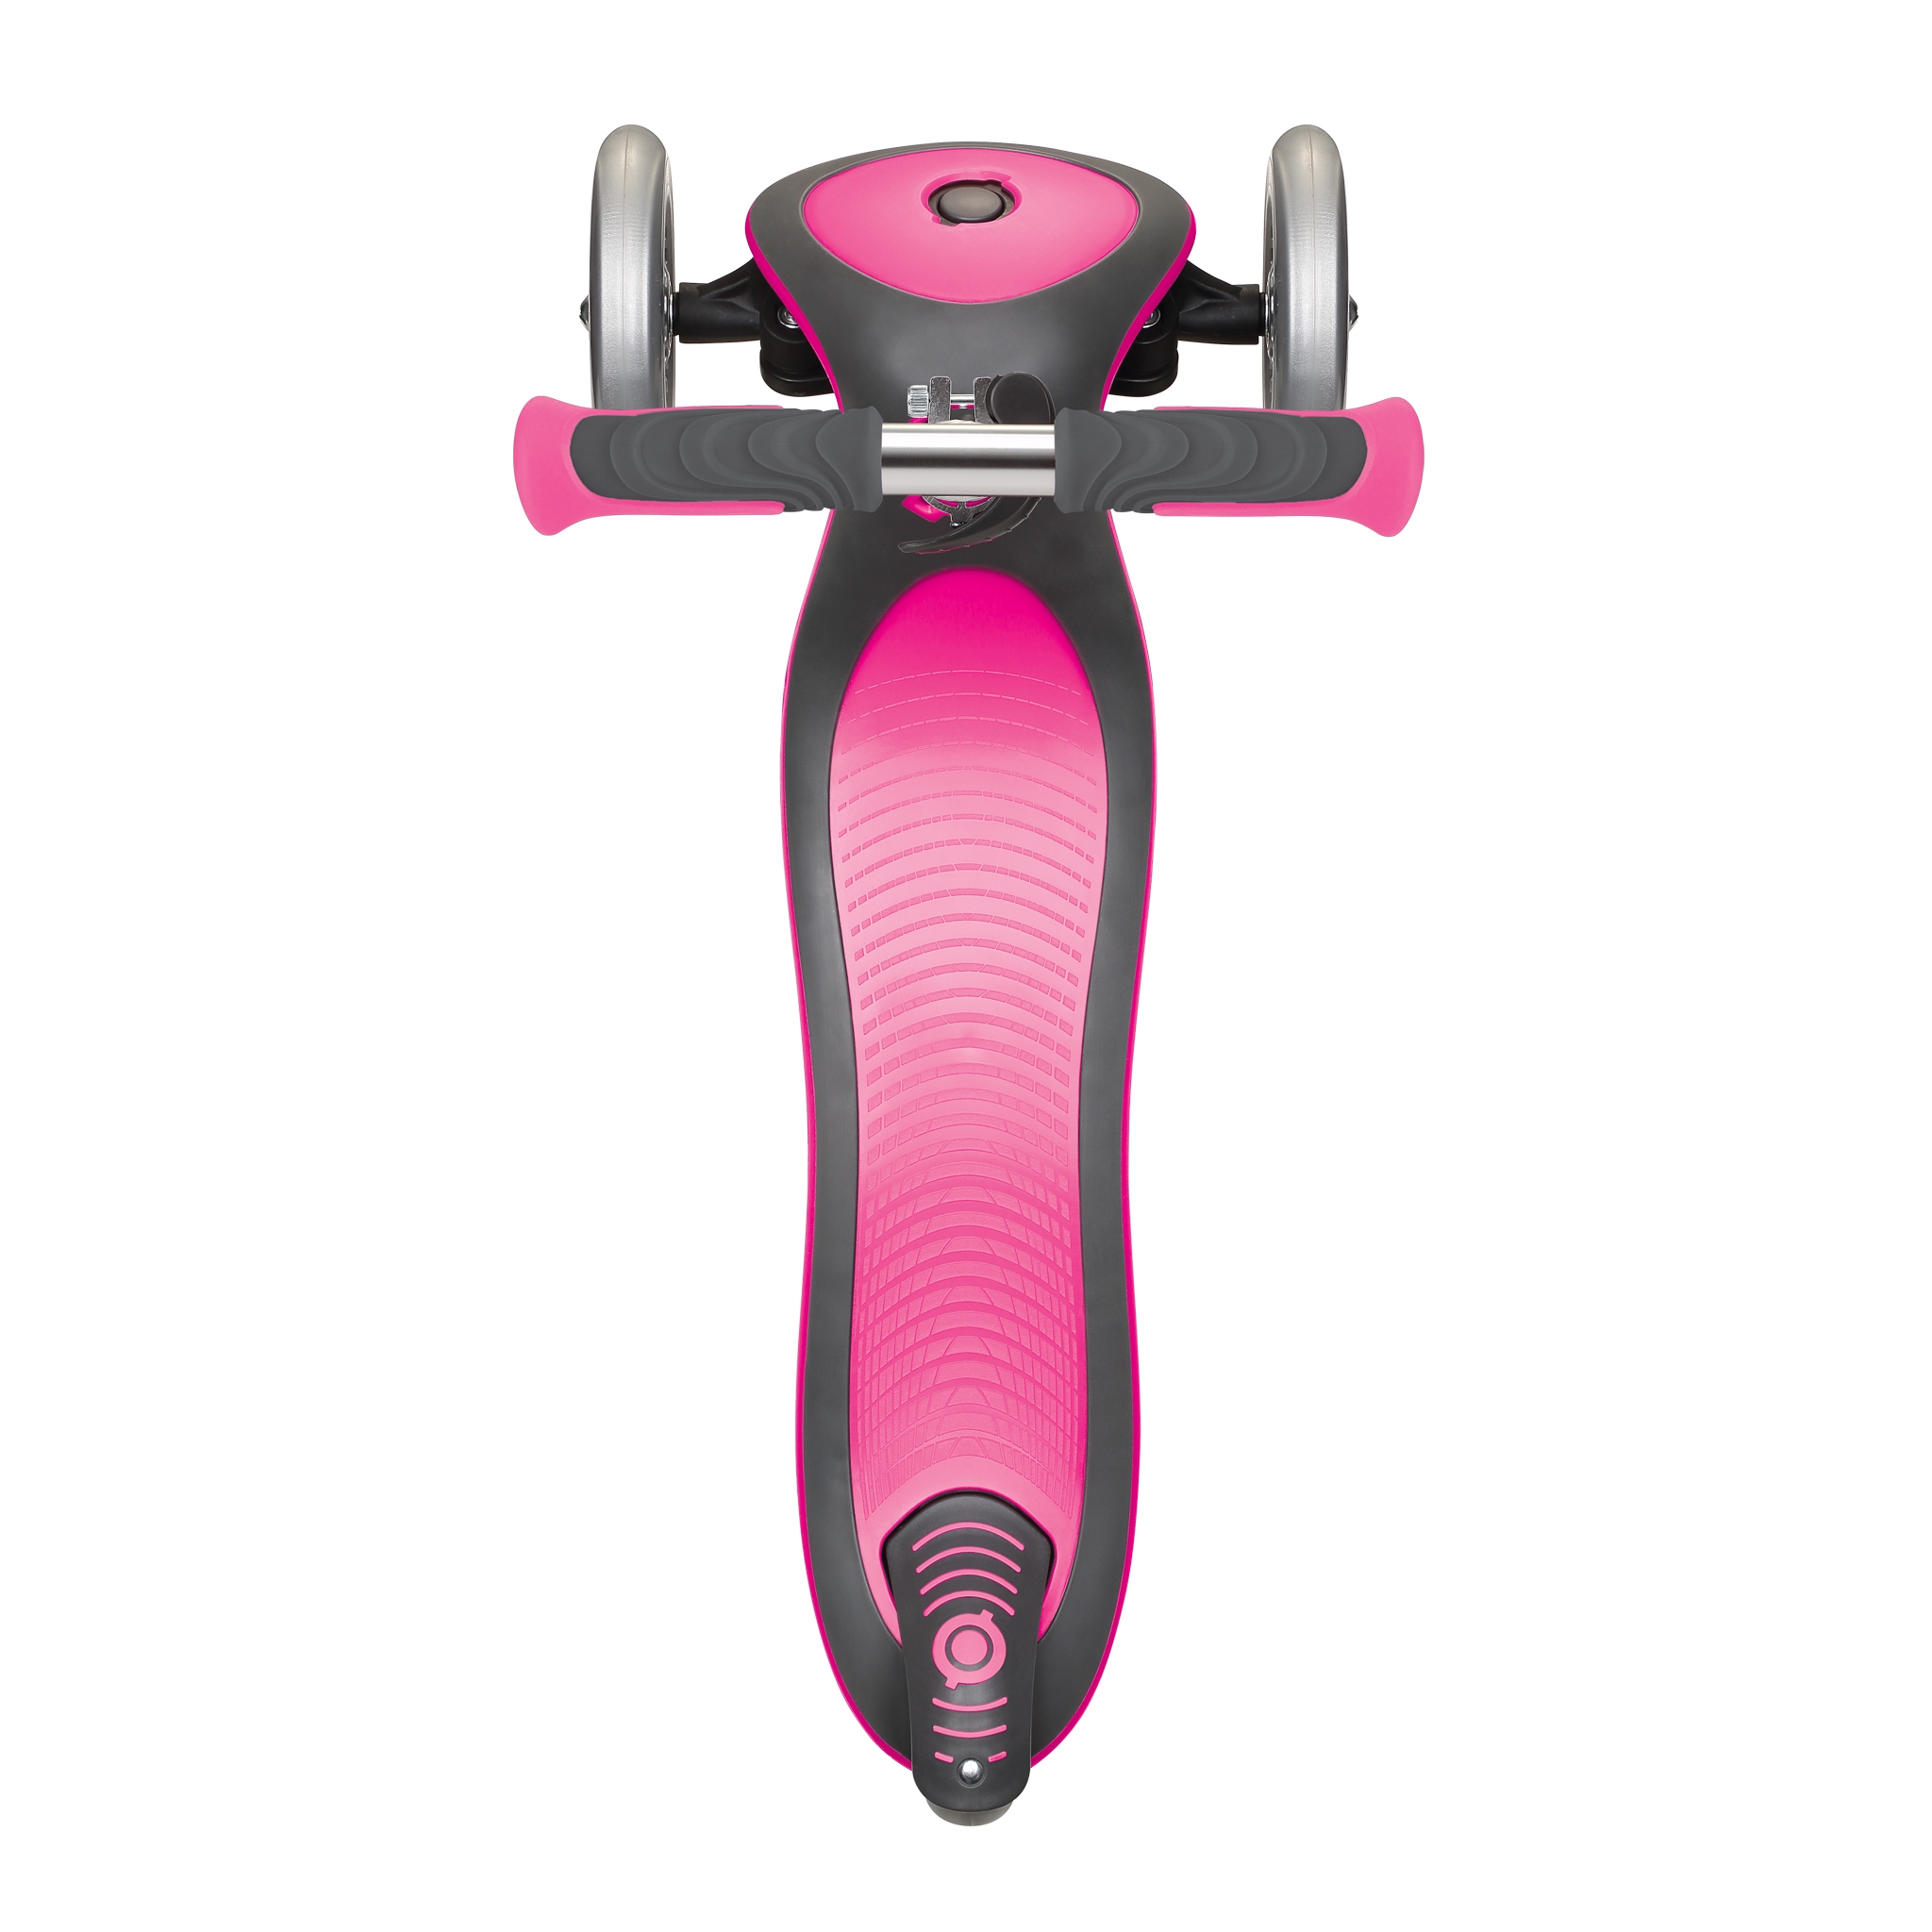 Globber-ELITE-DELUXE-3-wheel-foldable-scooter-for-kids-with-extra-wide-scooter-deck-deep-pink 4